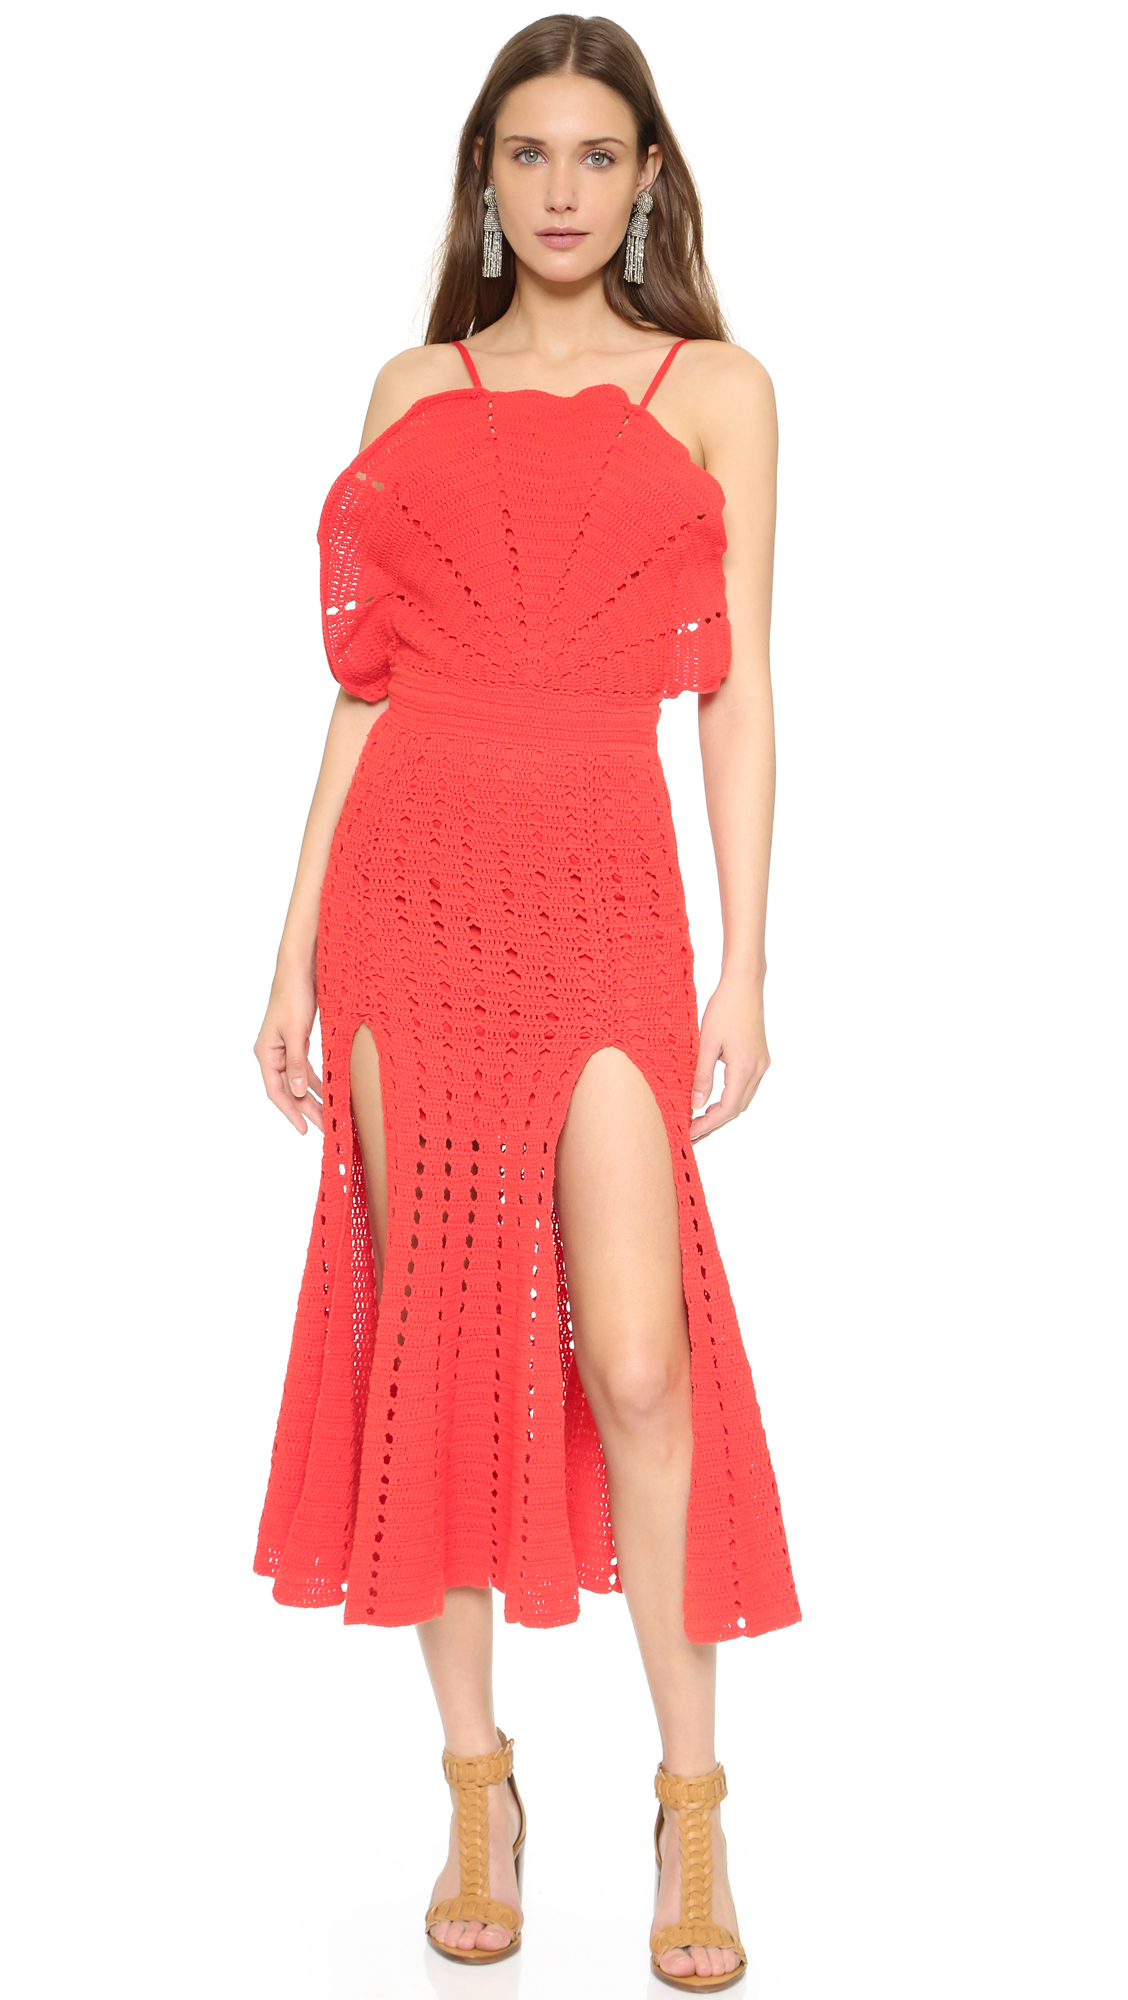 Lyst - Alice Mccall Room Is On Fire Dress in Red